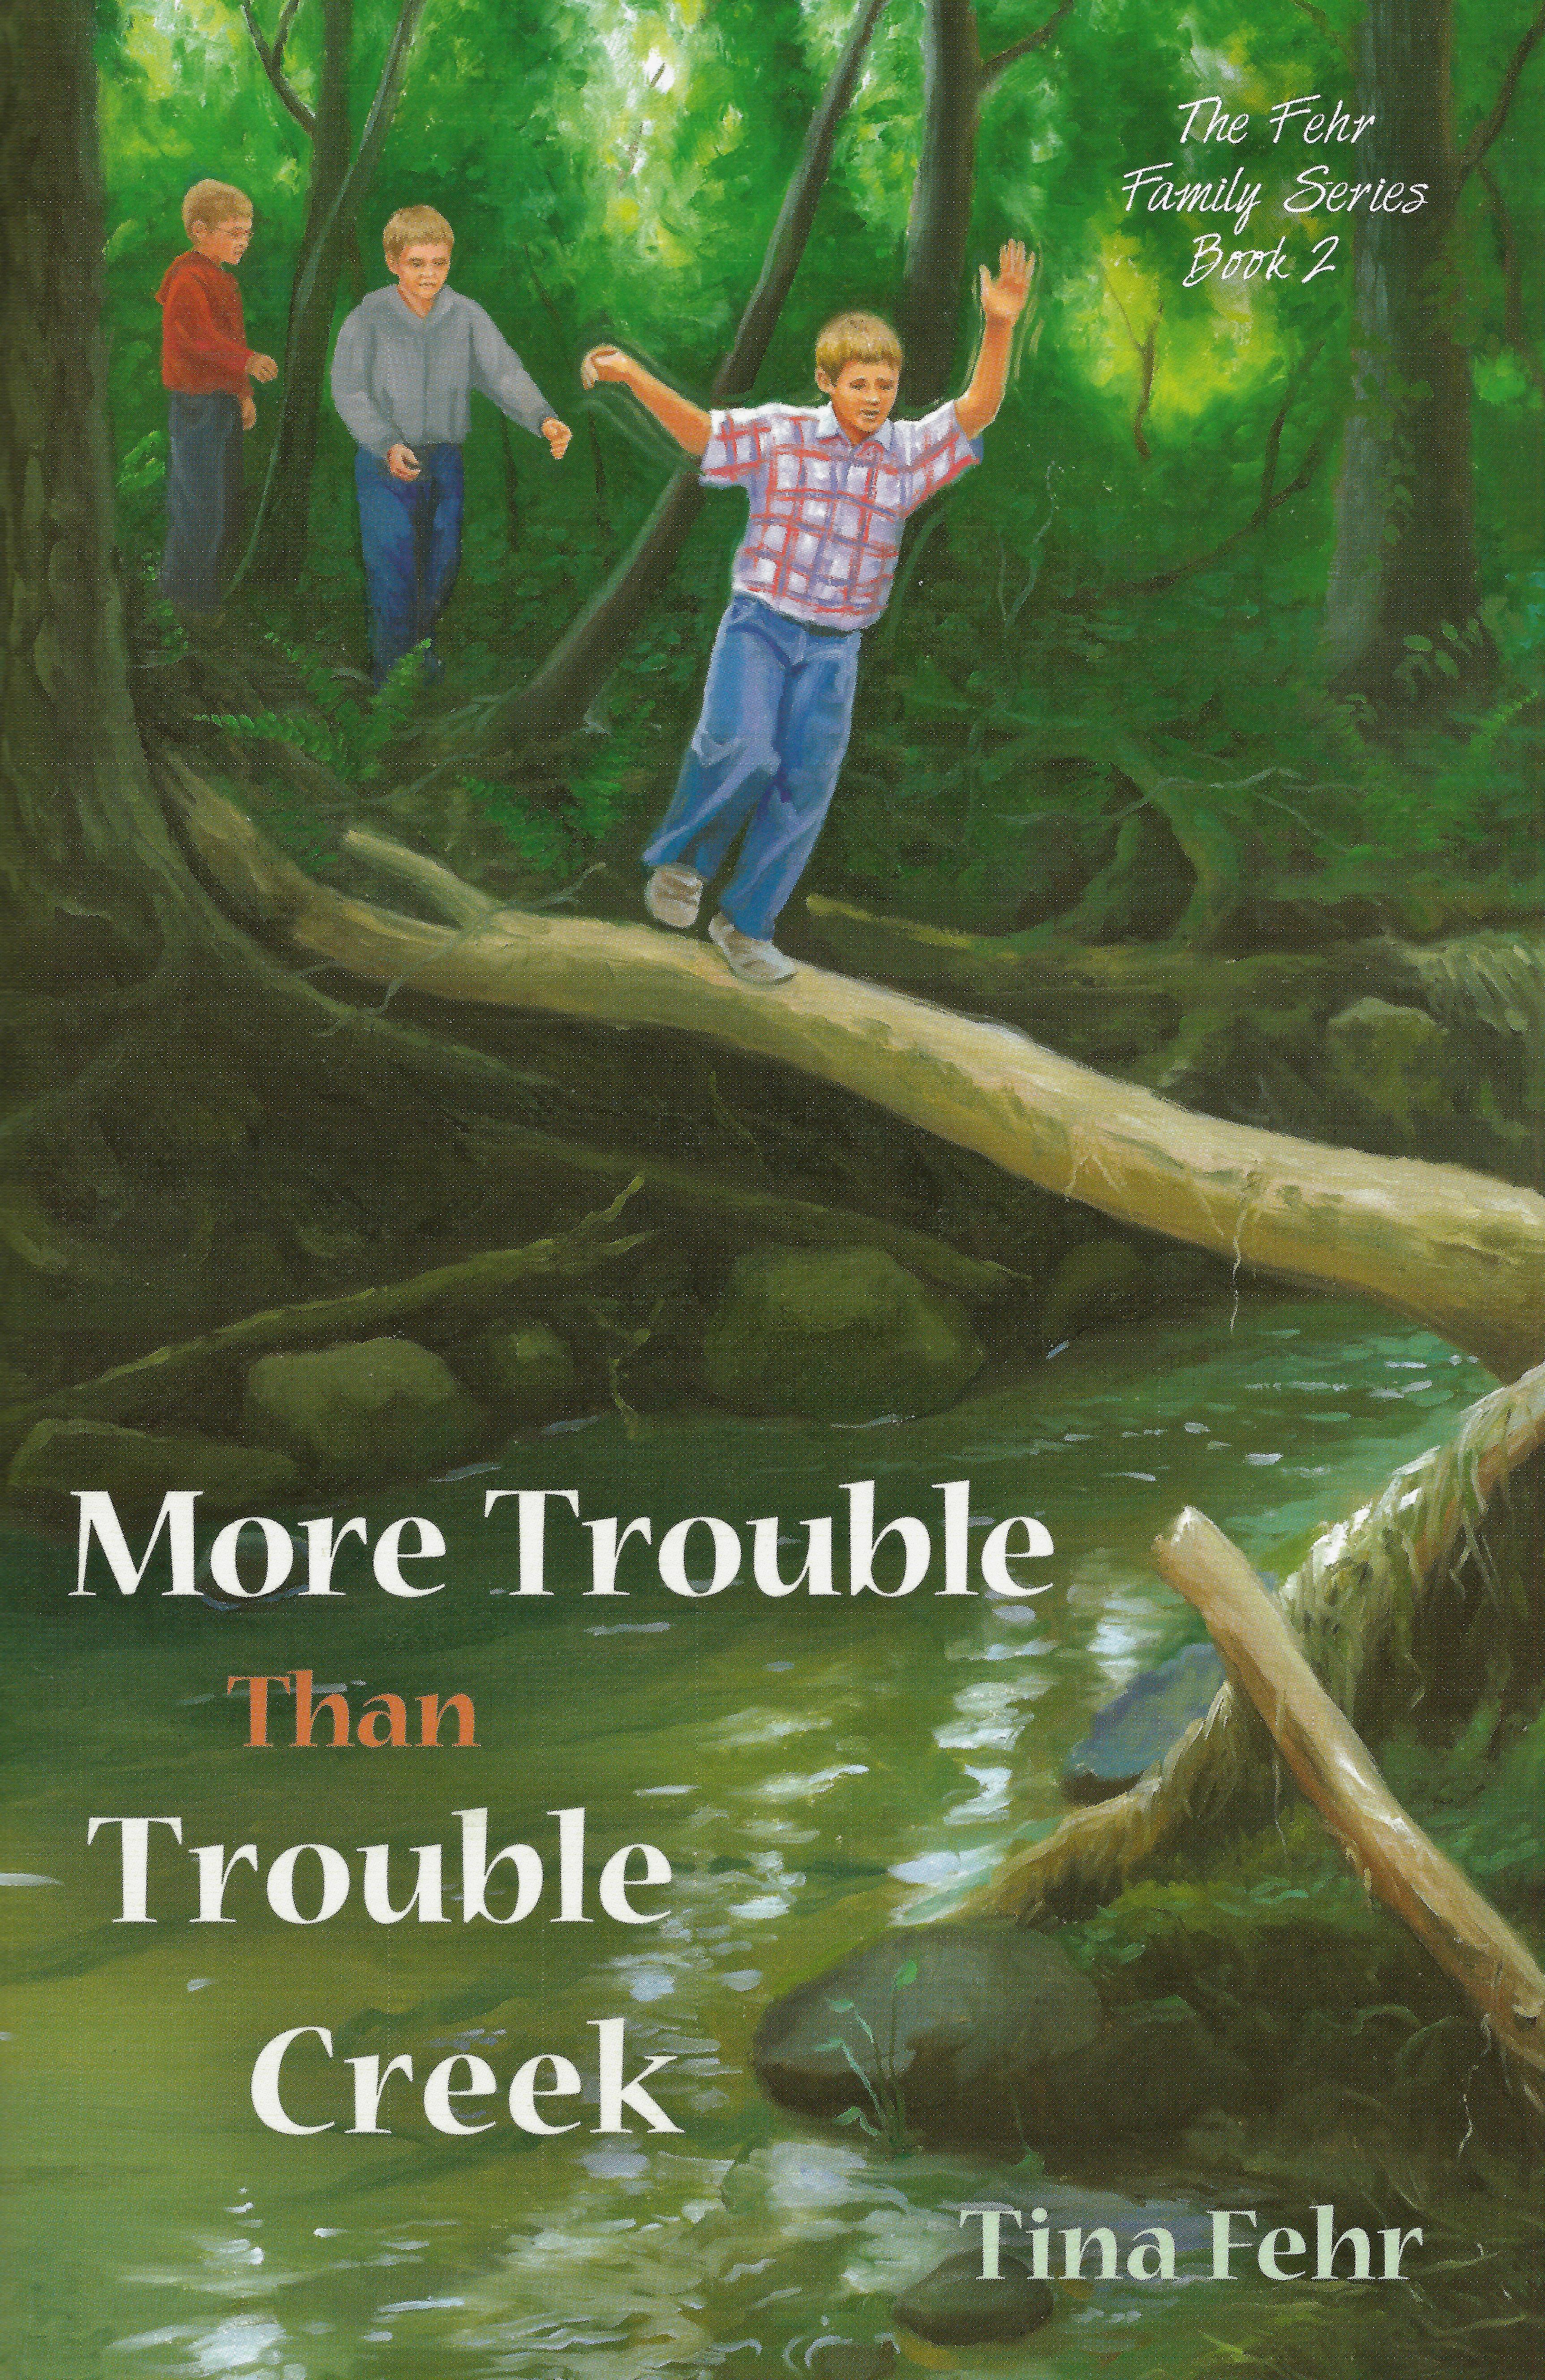 MORE TROUBLE THAN TROUBLE CREEK Tina Fehr